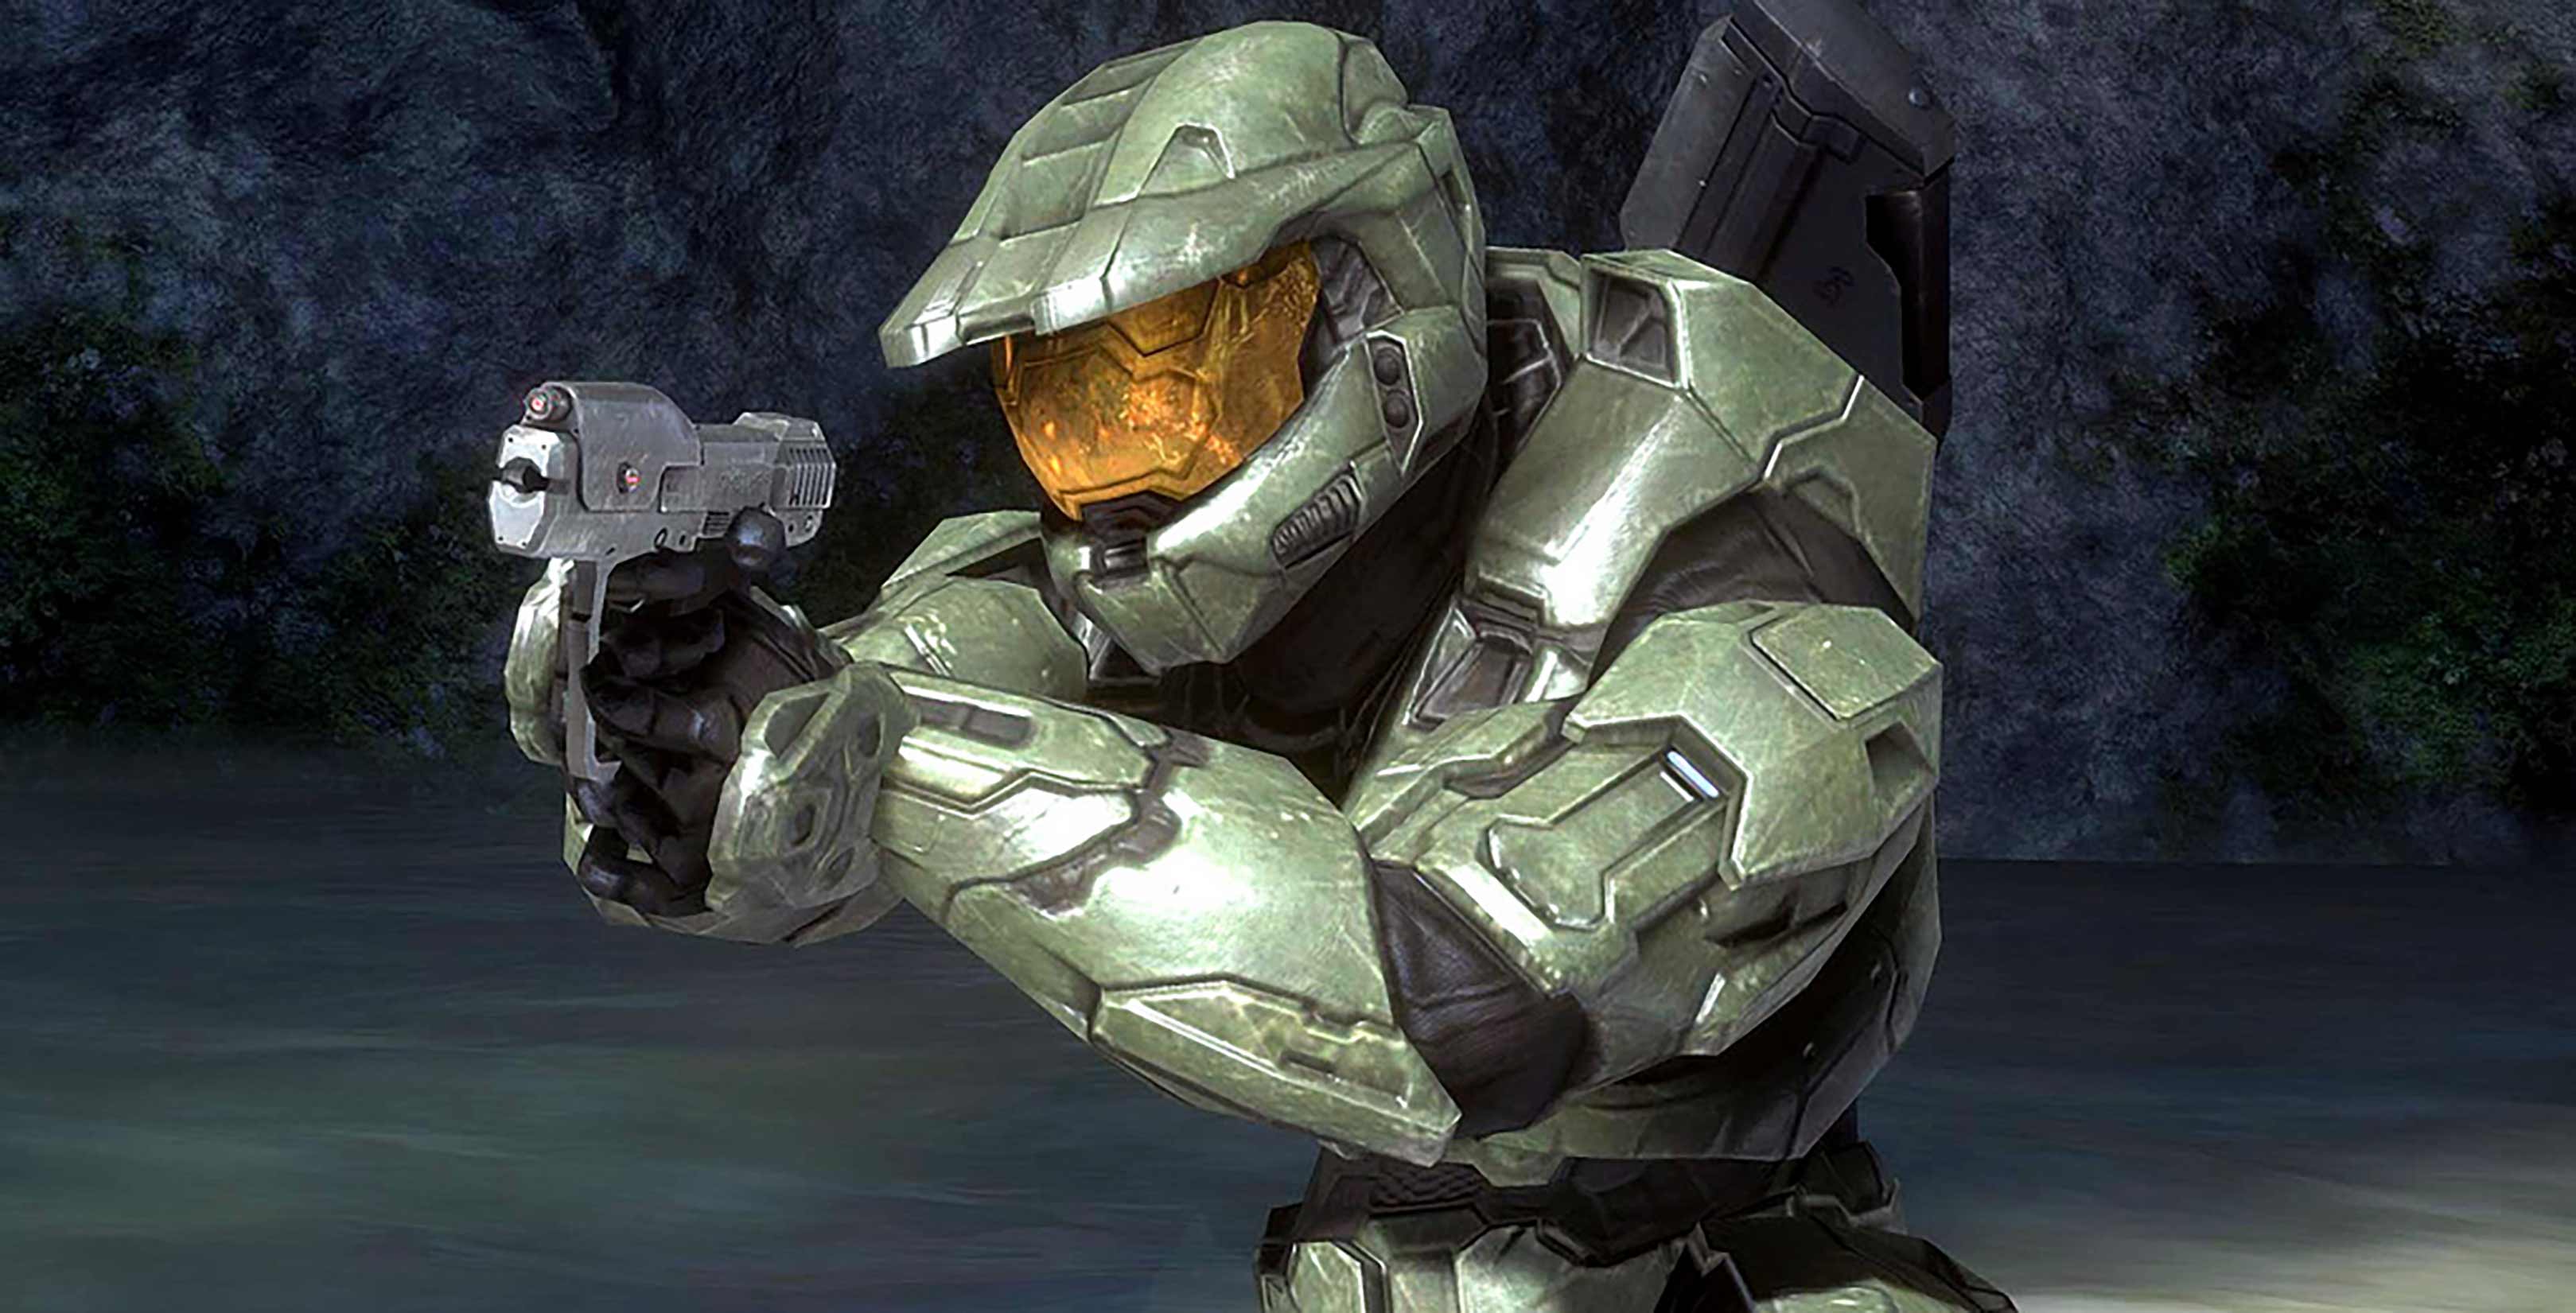 Halo Master Chief with pistol